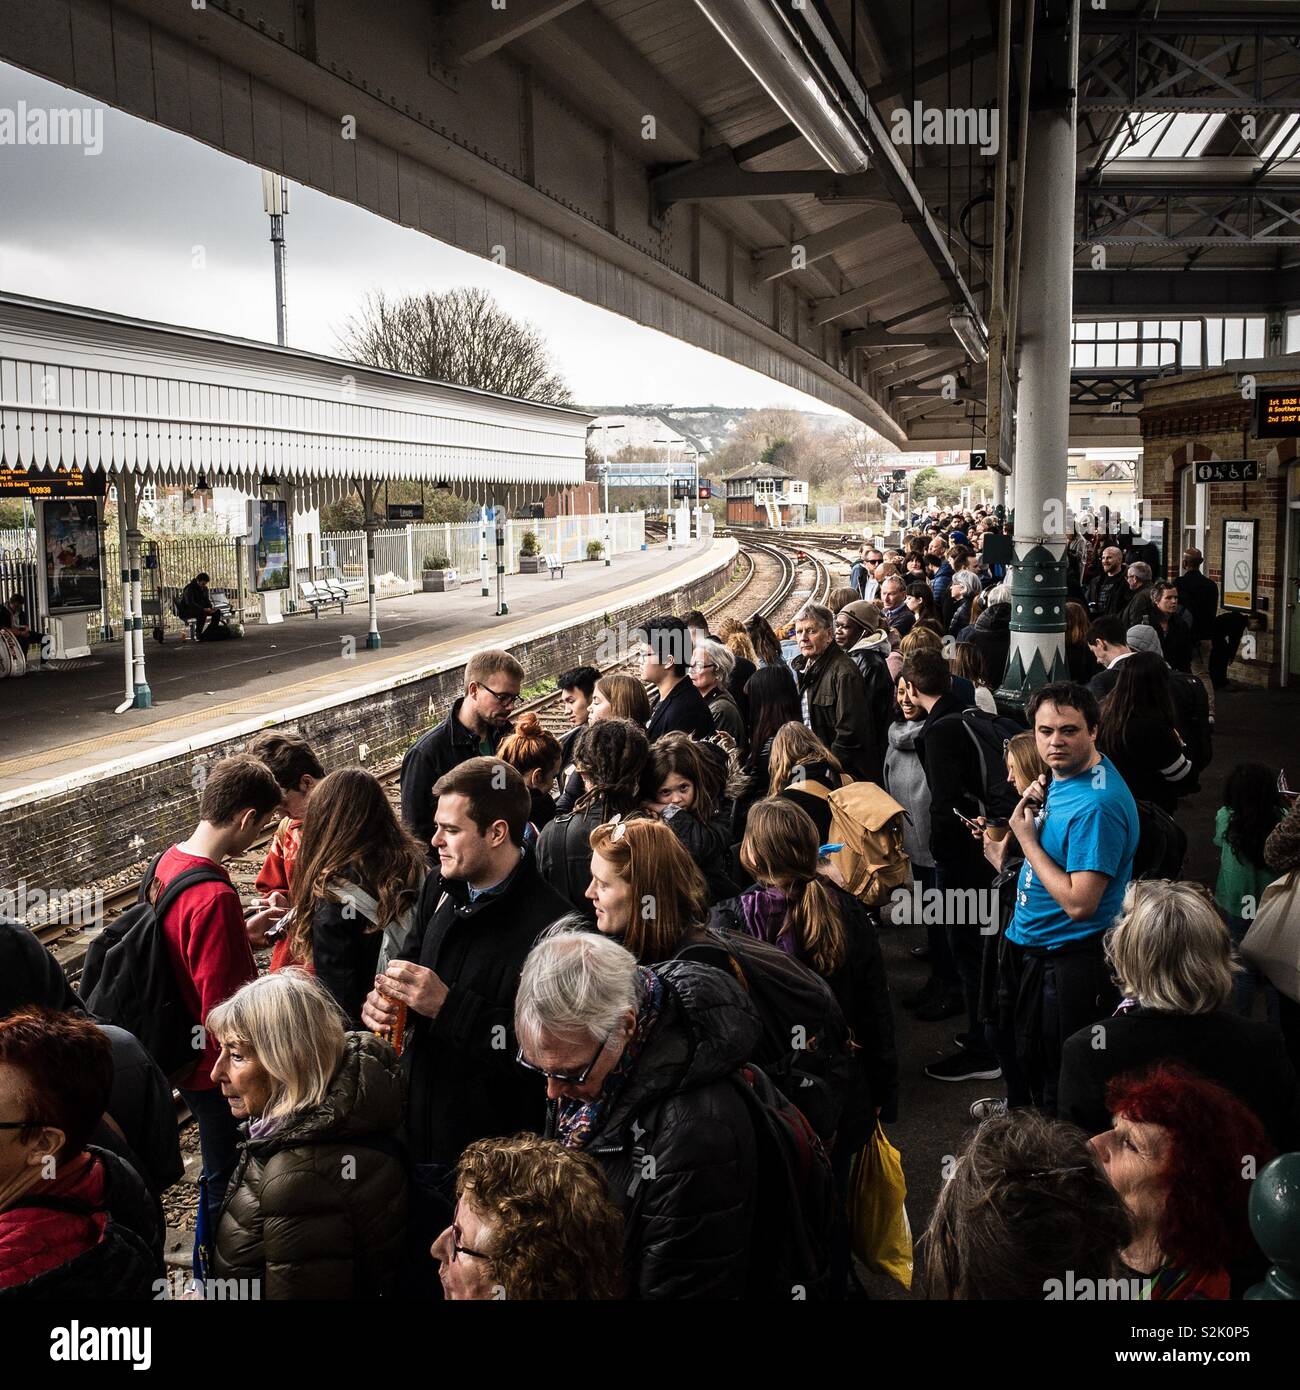 Crowds at Lewes station, West Sussex, waiting for a train to London on 23/03/2019. Many were heading to London from Brighton, diverted via Lewes due to rail engineering works. Stock Photo